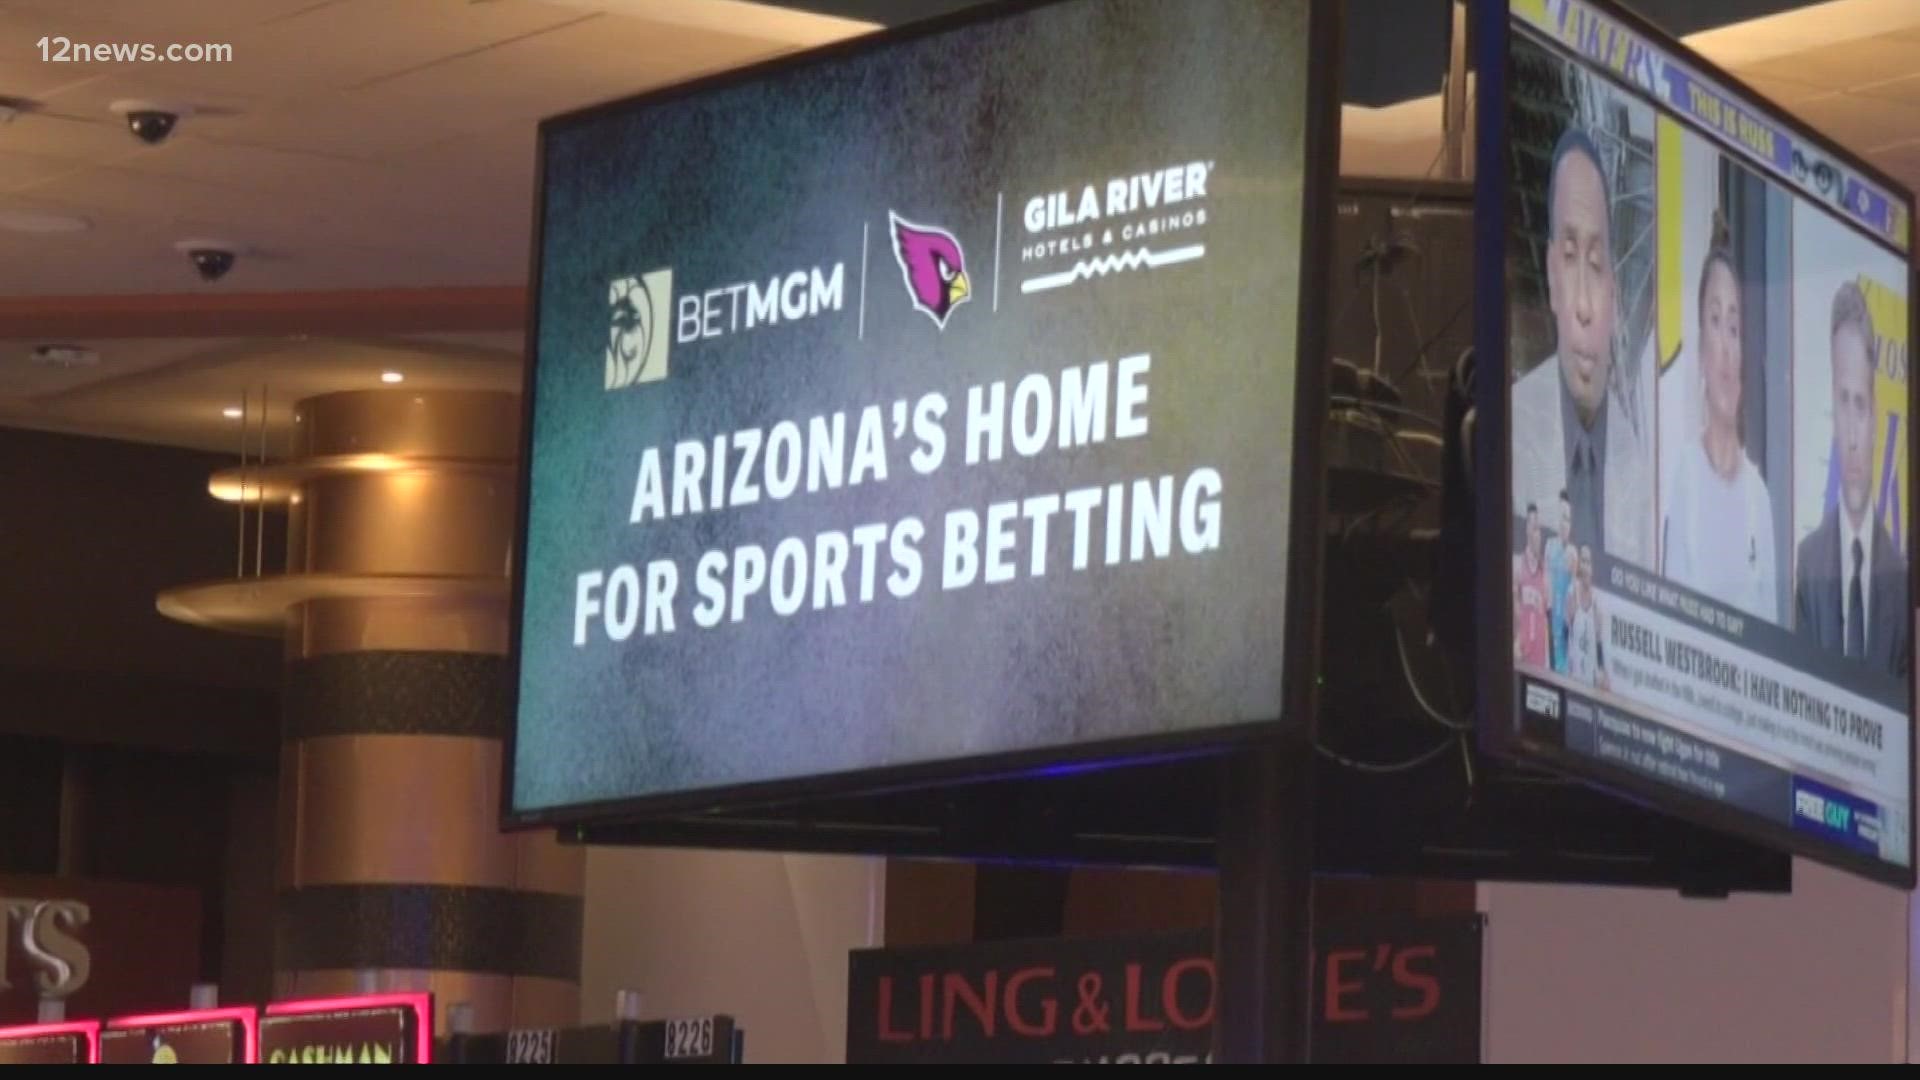 Sports betting is officially legal in Arizona and kicks off September 9.